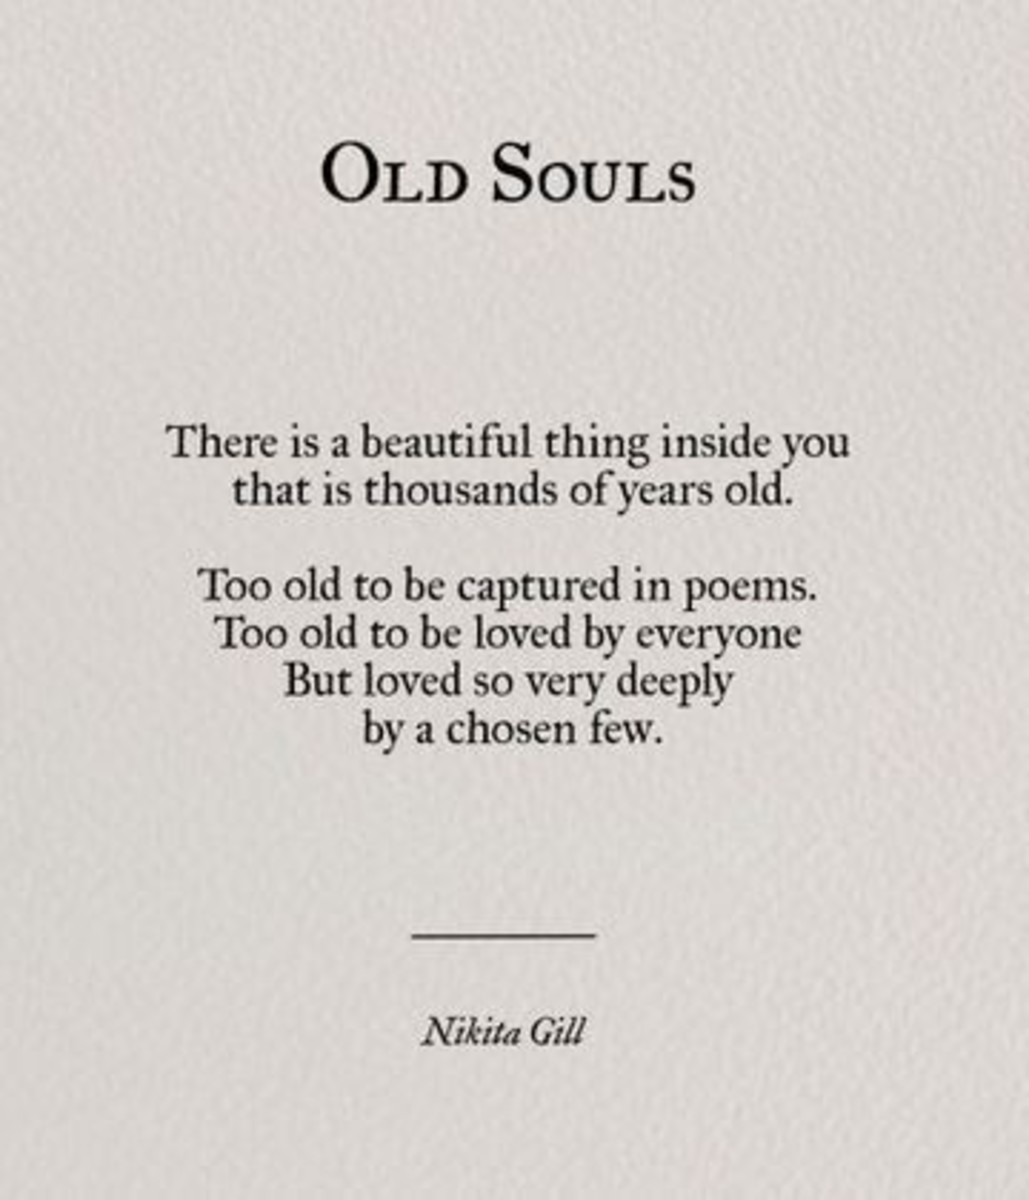 nikita-gill-instapoets-changing-the-poetry-game